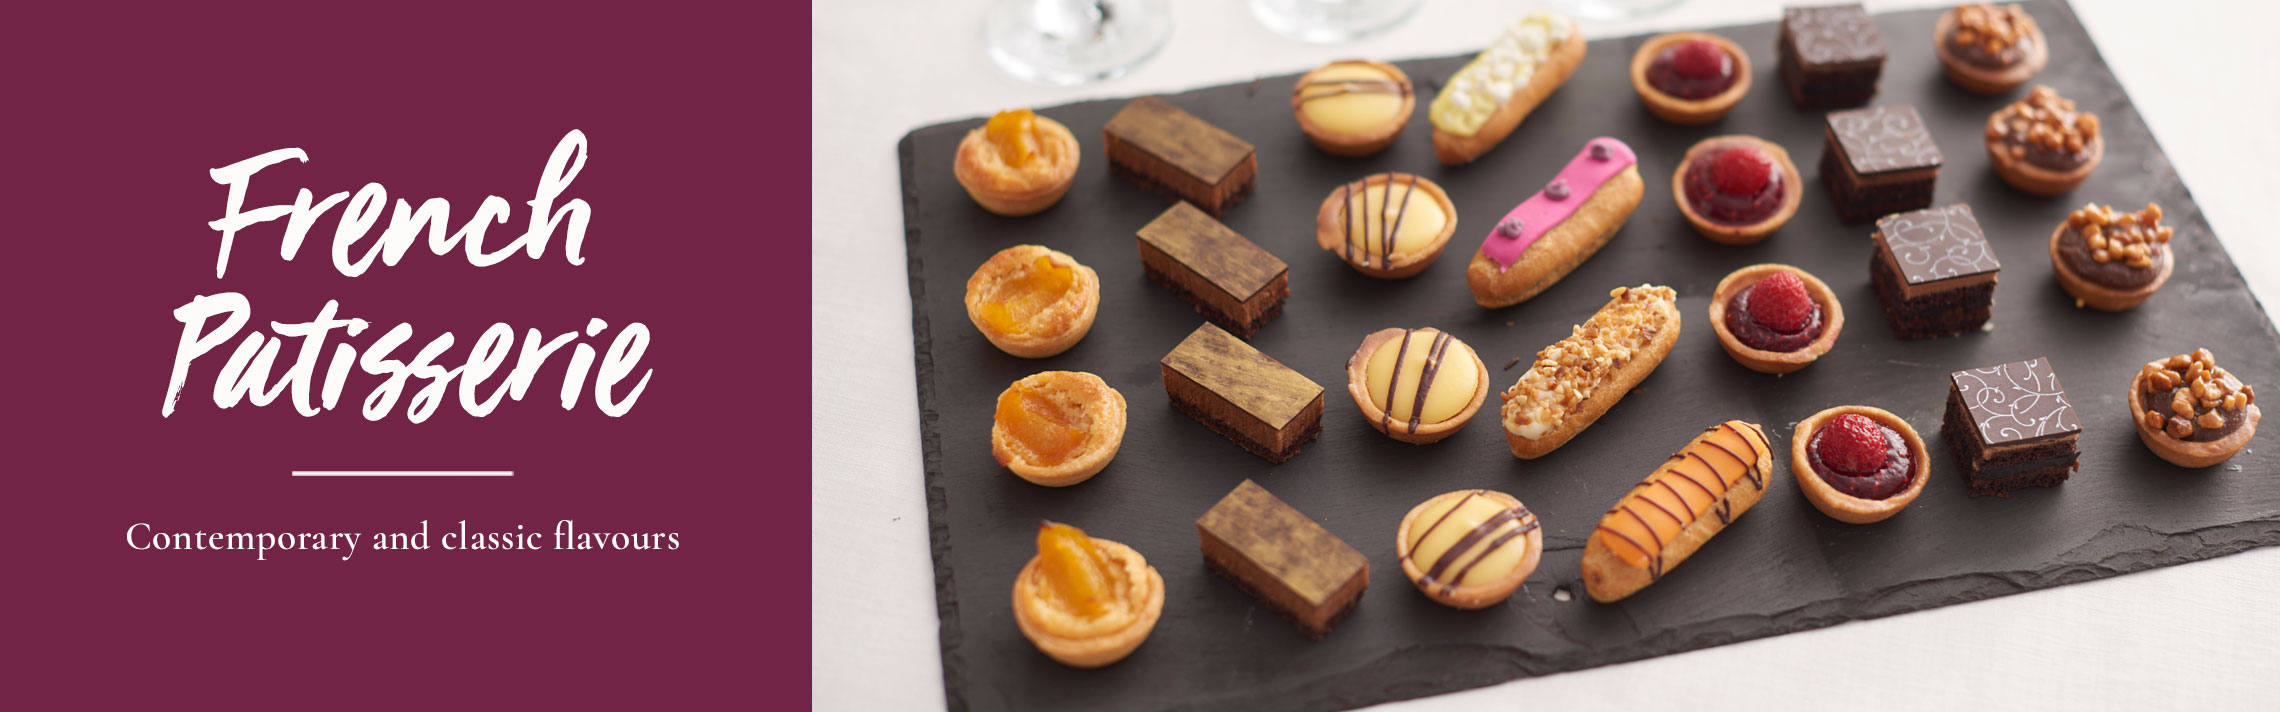 Petit Fours - Tipiak Foodservice - Canapes, Macarons, Sweet Patisserie